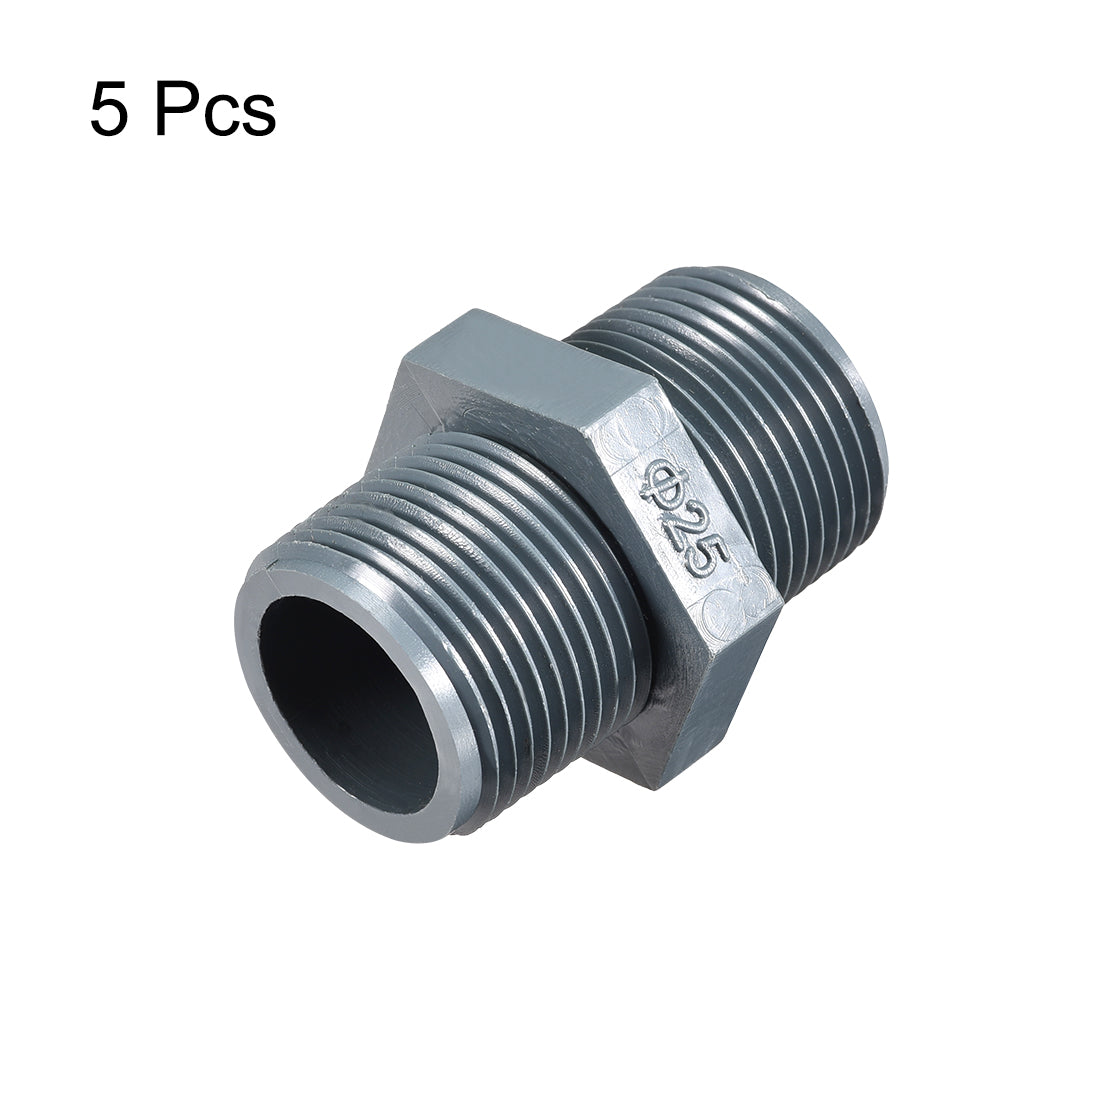 uxcell Uxcell Pipe Fittings Connector G3/4 xG3/4 Male Thread Adapter Plastic Hex Connector 5pcs